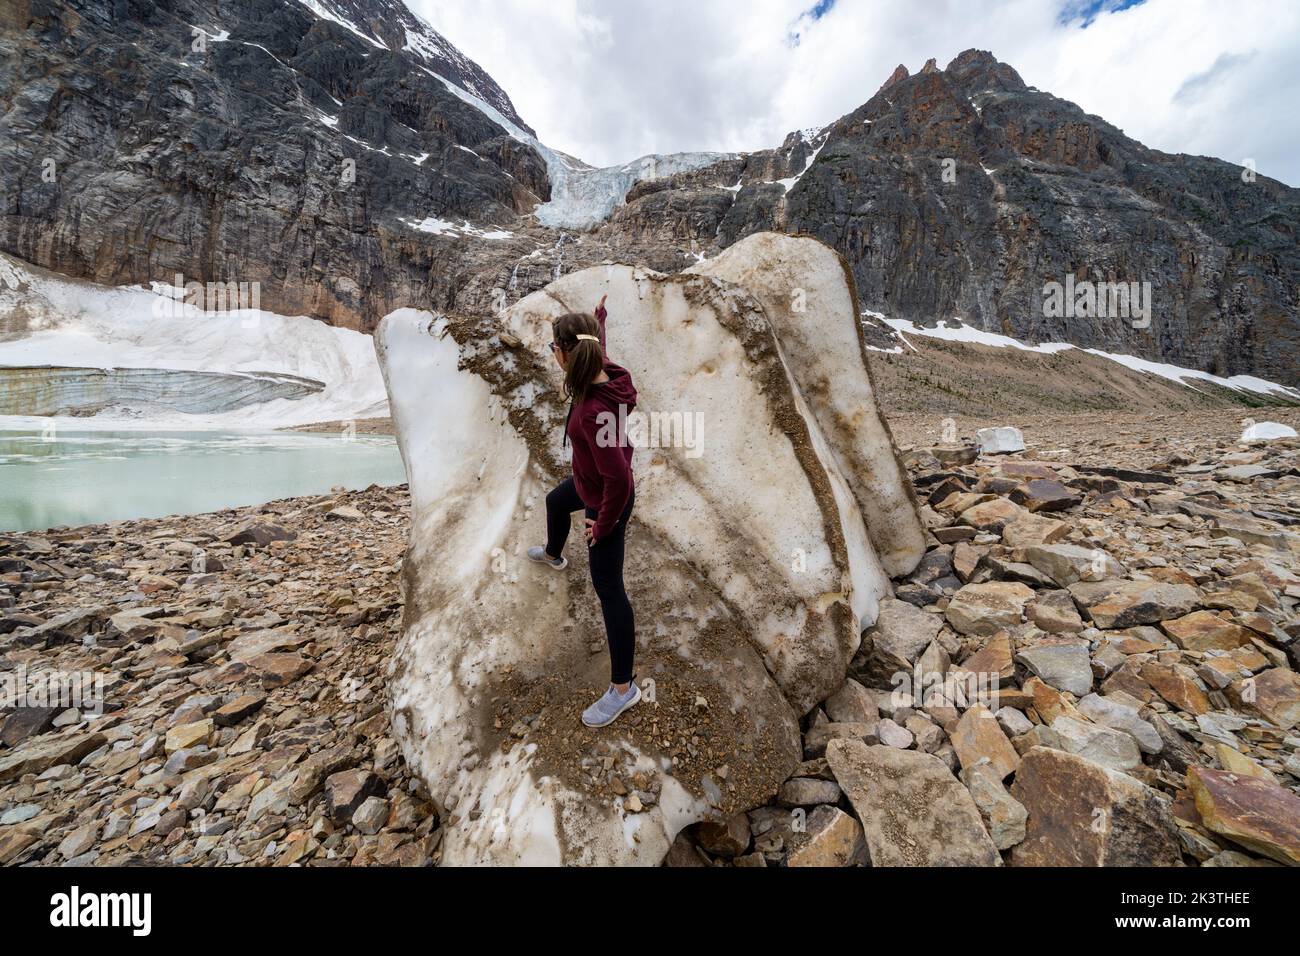 Woman poses with a large iceberg chunk at Mt. Edith Cavell and Angel Glacier Stock Photo